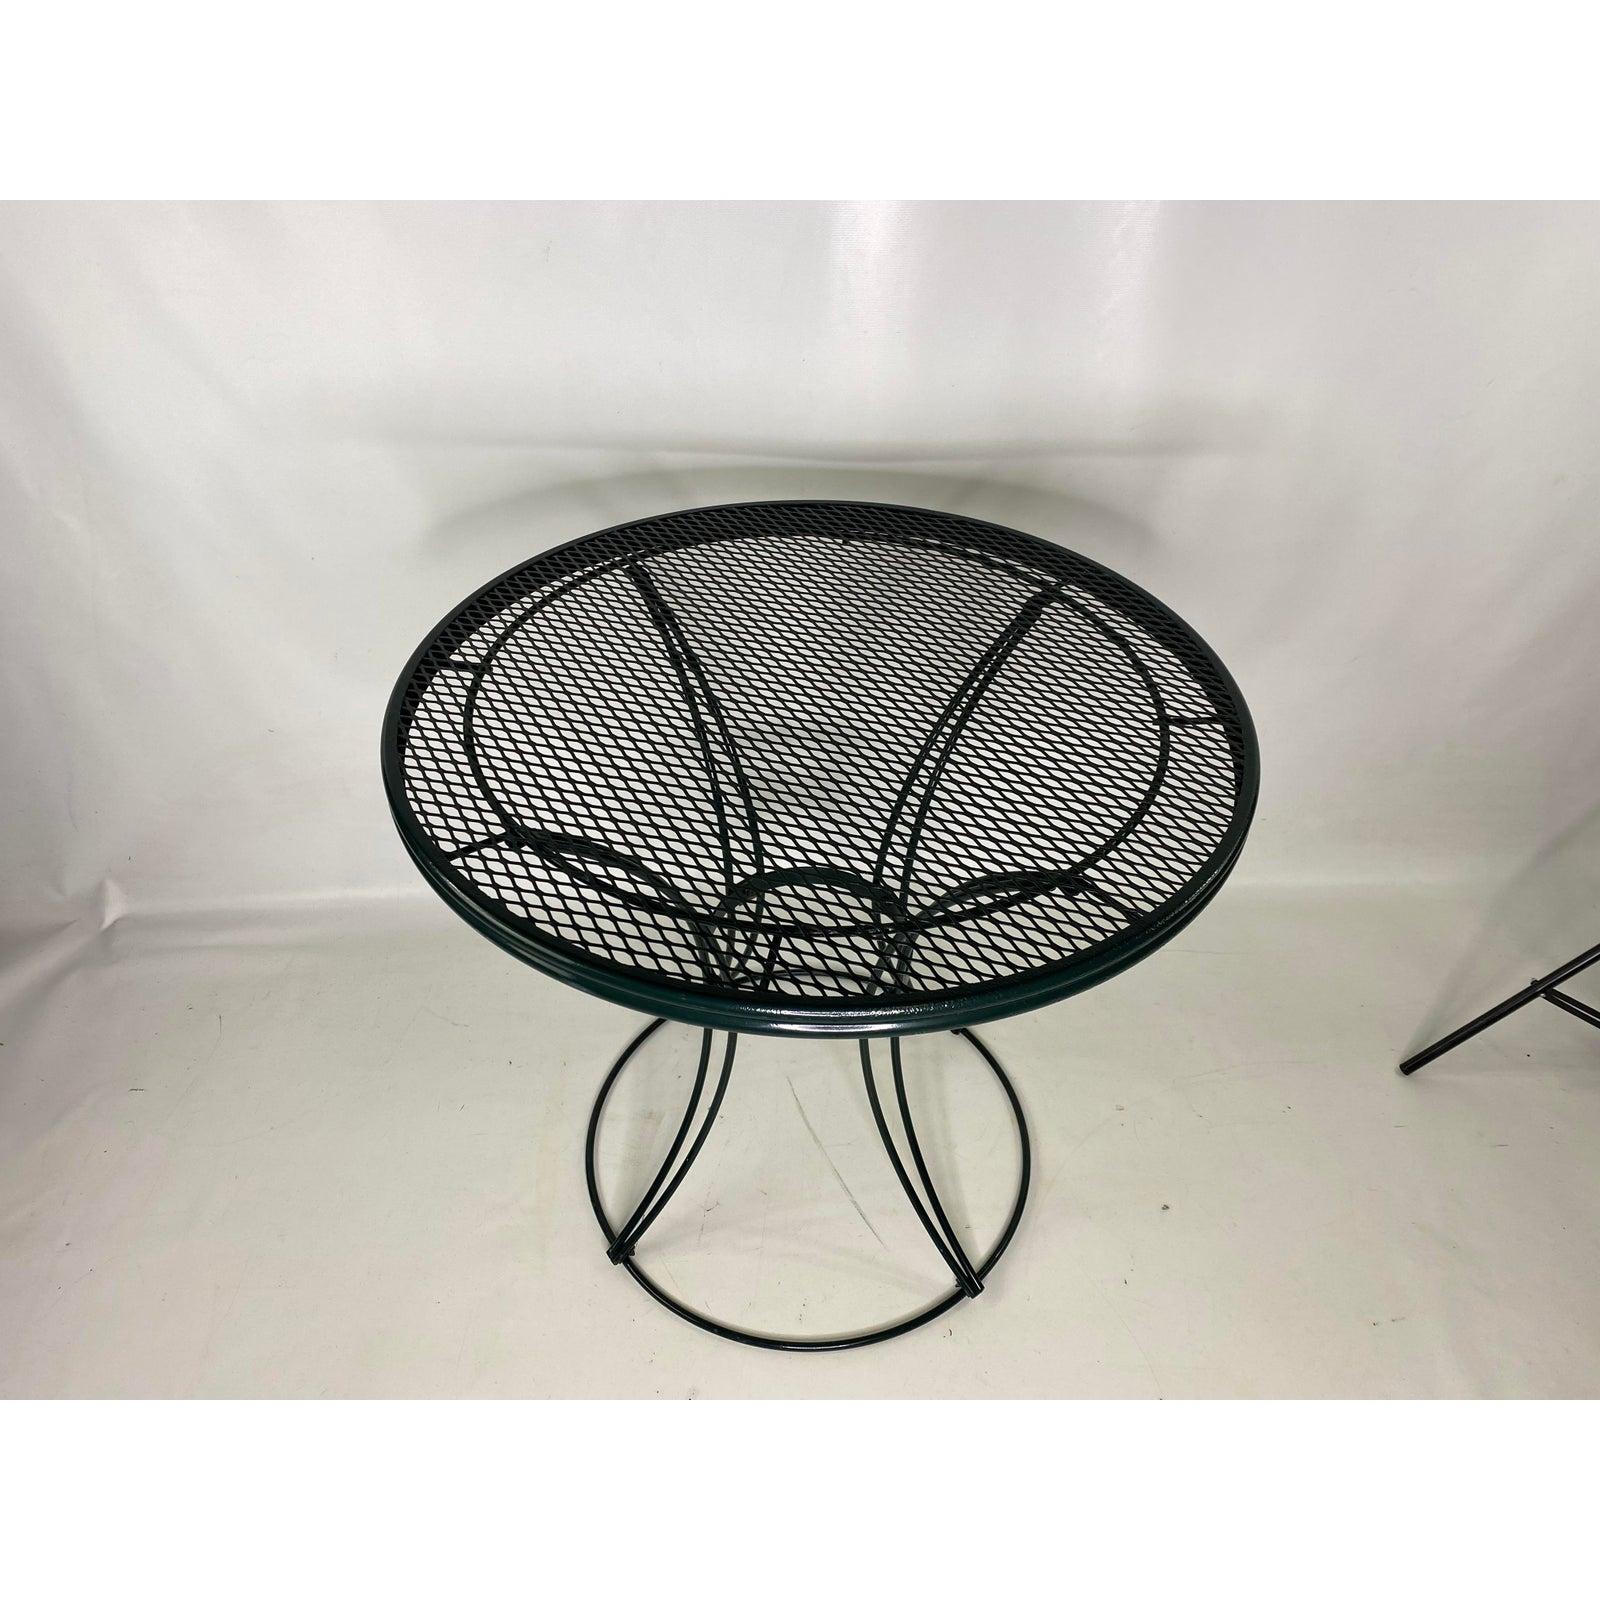 Vintage Homecrest Wire side table

The color of the table is dark green.